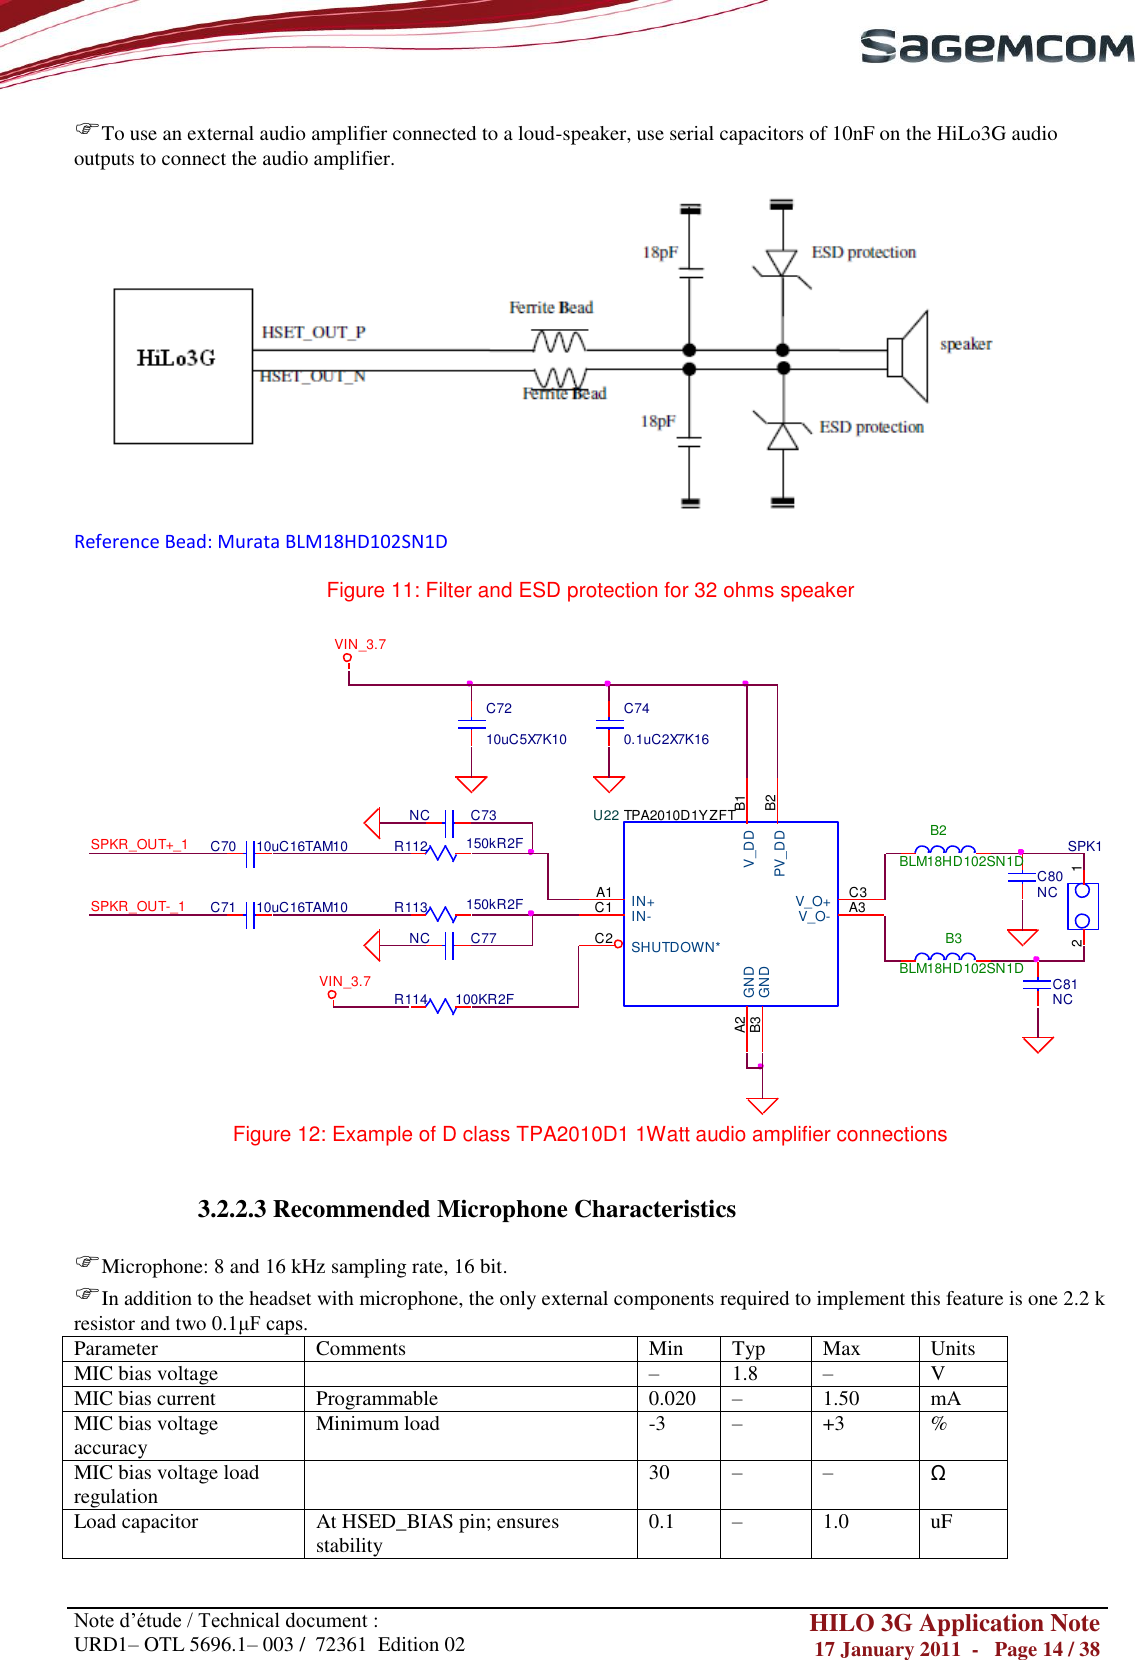       Note d‘étude / Technical document : URD1– OTL 5696.1– 003 /  72361  Edition 02 HILO 3G Application Note 17 January 2011  -   Page 14 / 38    To use an external audio amplifier connected to a loud-speaker, use serial capacitors of 10nF on the HiLo3G audio outputs to connect the audio amplifier.   Reference Bead: Murata BLM18HD102SN1D  Figure 11: Filter and ESD protection for 32 ohms speaker  SPK112C77NCR114 100KR2FC80NCB2BLM18HD102SN1DC81NCVIN_3.7VIN_3.7C70 10uC16TAM10SPKR_OUT+_1C740.1uC2X7K16C71 10uC16TAM10SPKR_OUT-_1R112 150kR2FC7210uC5X7K10B3BLM18HD102SN1DR113 150kR2FC73NC TPA2010D1YZFTU22GNDB3 V_DD B1V_O- A3V_O+ C3IN-C1 IN+A1PV_DD B2SHUTDOWN*C2GNDA2 Figure 12: Example of D class TPA2010D1 1Watt audio amplifier connections                                                           3.2.2.3 Recommended Microphone Characteristics   Microphone: 8 and 16 kHz sampling rate, 16 bit. In addition to the headset with microphone, the only external components required to implement this feature is one 2.2 k resistor and two 0.1μF caps. Parameter Comments Min Typ Max Units MIC bias voltage  – 1.8 – V MIC bias current Programmable 0.020 – 1.50 mA MIC bias voltage accuracy Minimum load -3 – +3 % MIC bias voltage load regulation  30 – – Ω Load capacitor At HSED_BIAS pin; ensures stability 0.1 – 1.0 uF 